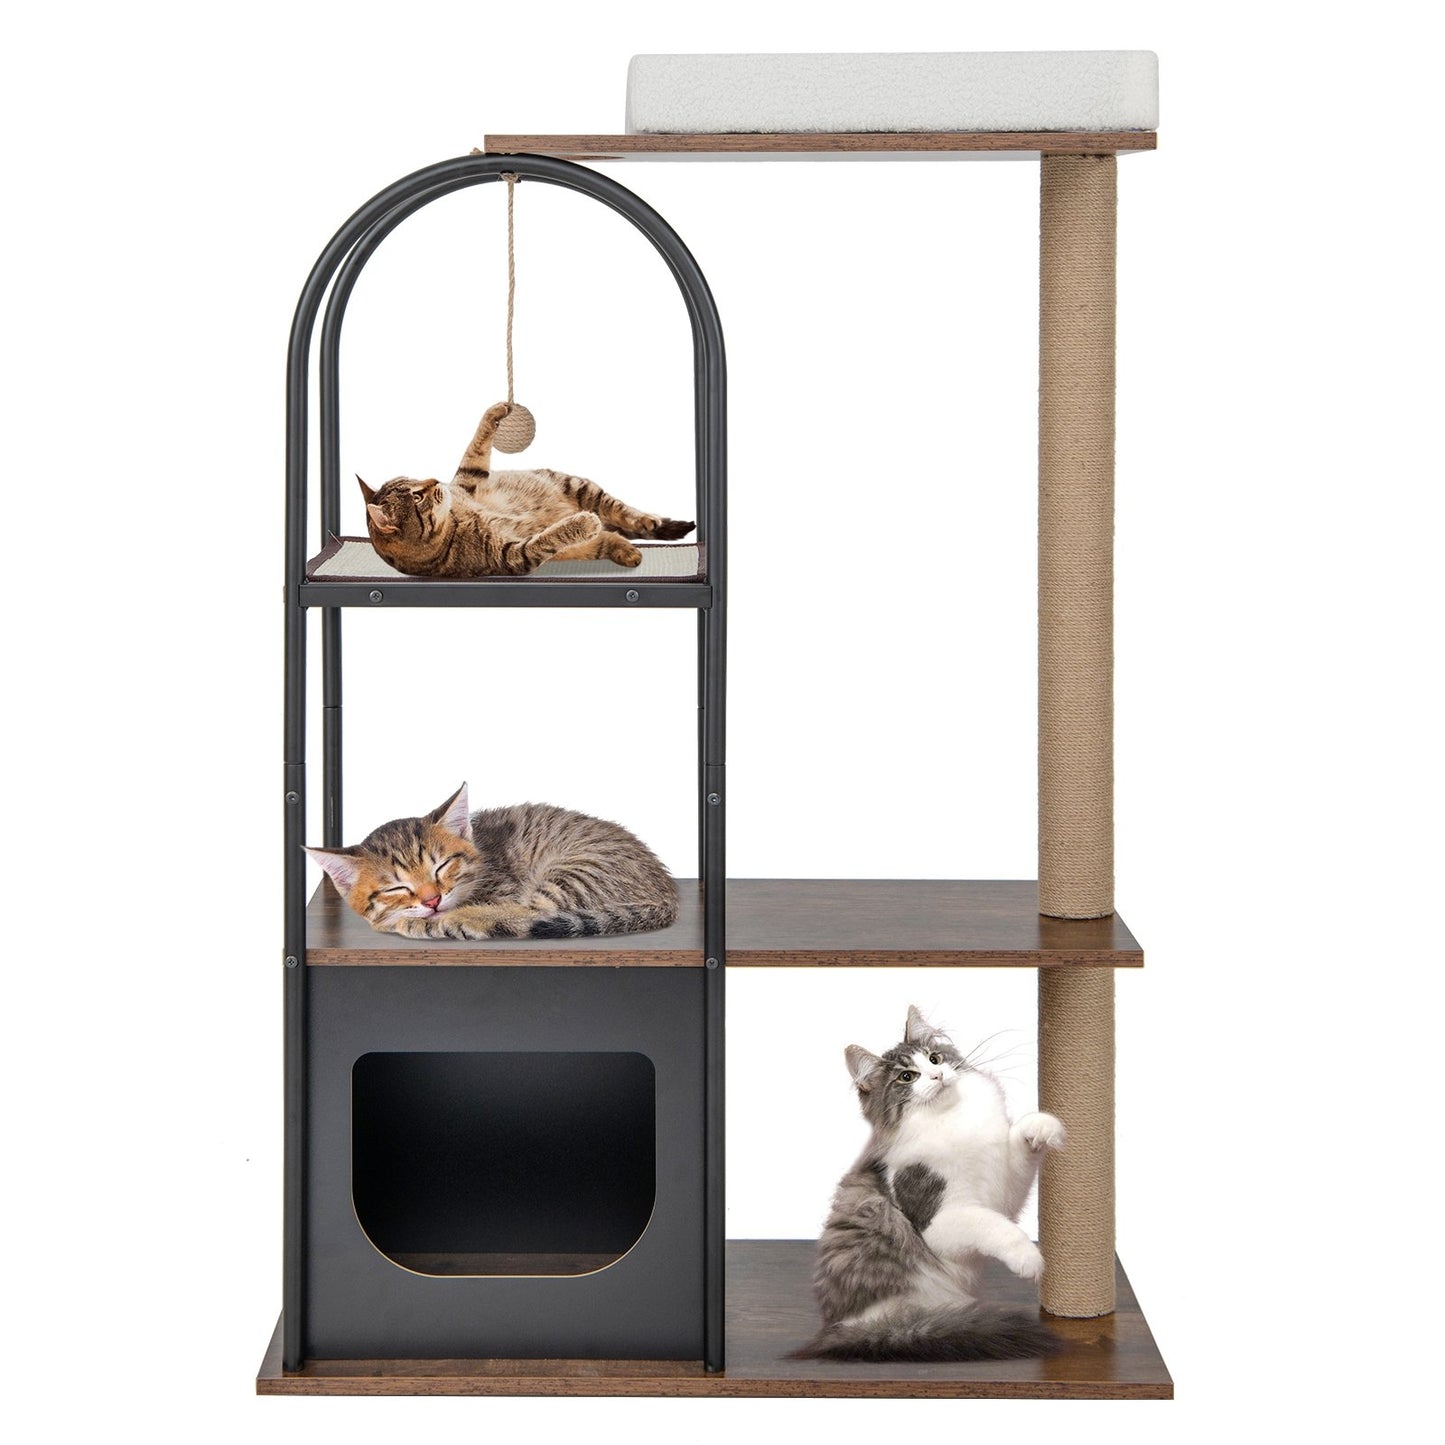 47 Inch Tall Cat Tree Tower Top Perch Cat Bed with Metal Frame, Black